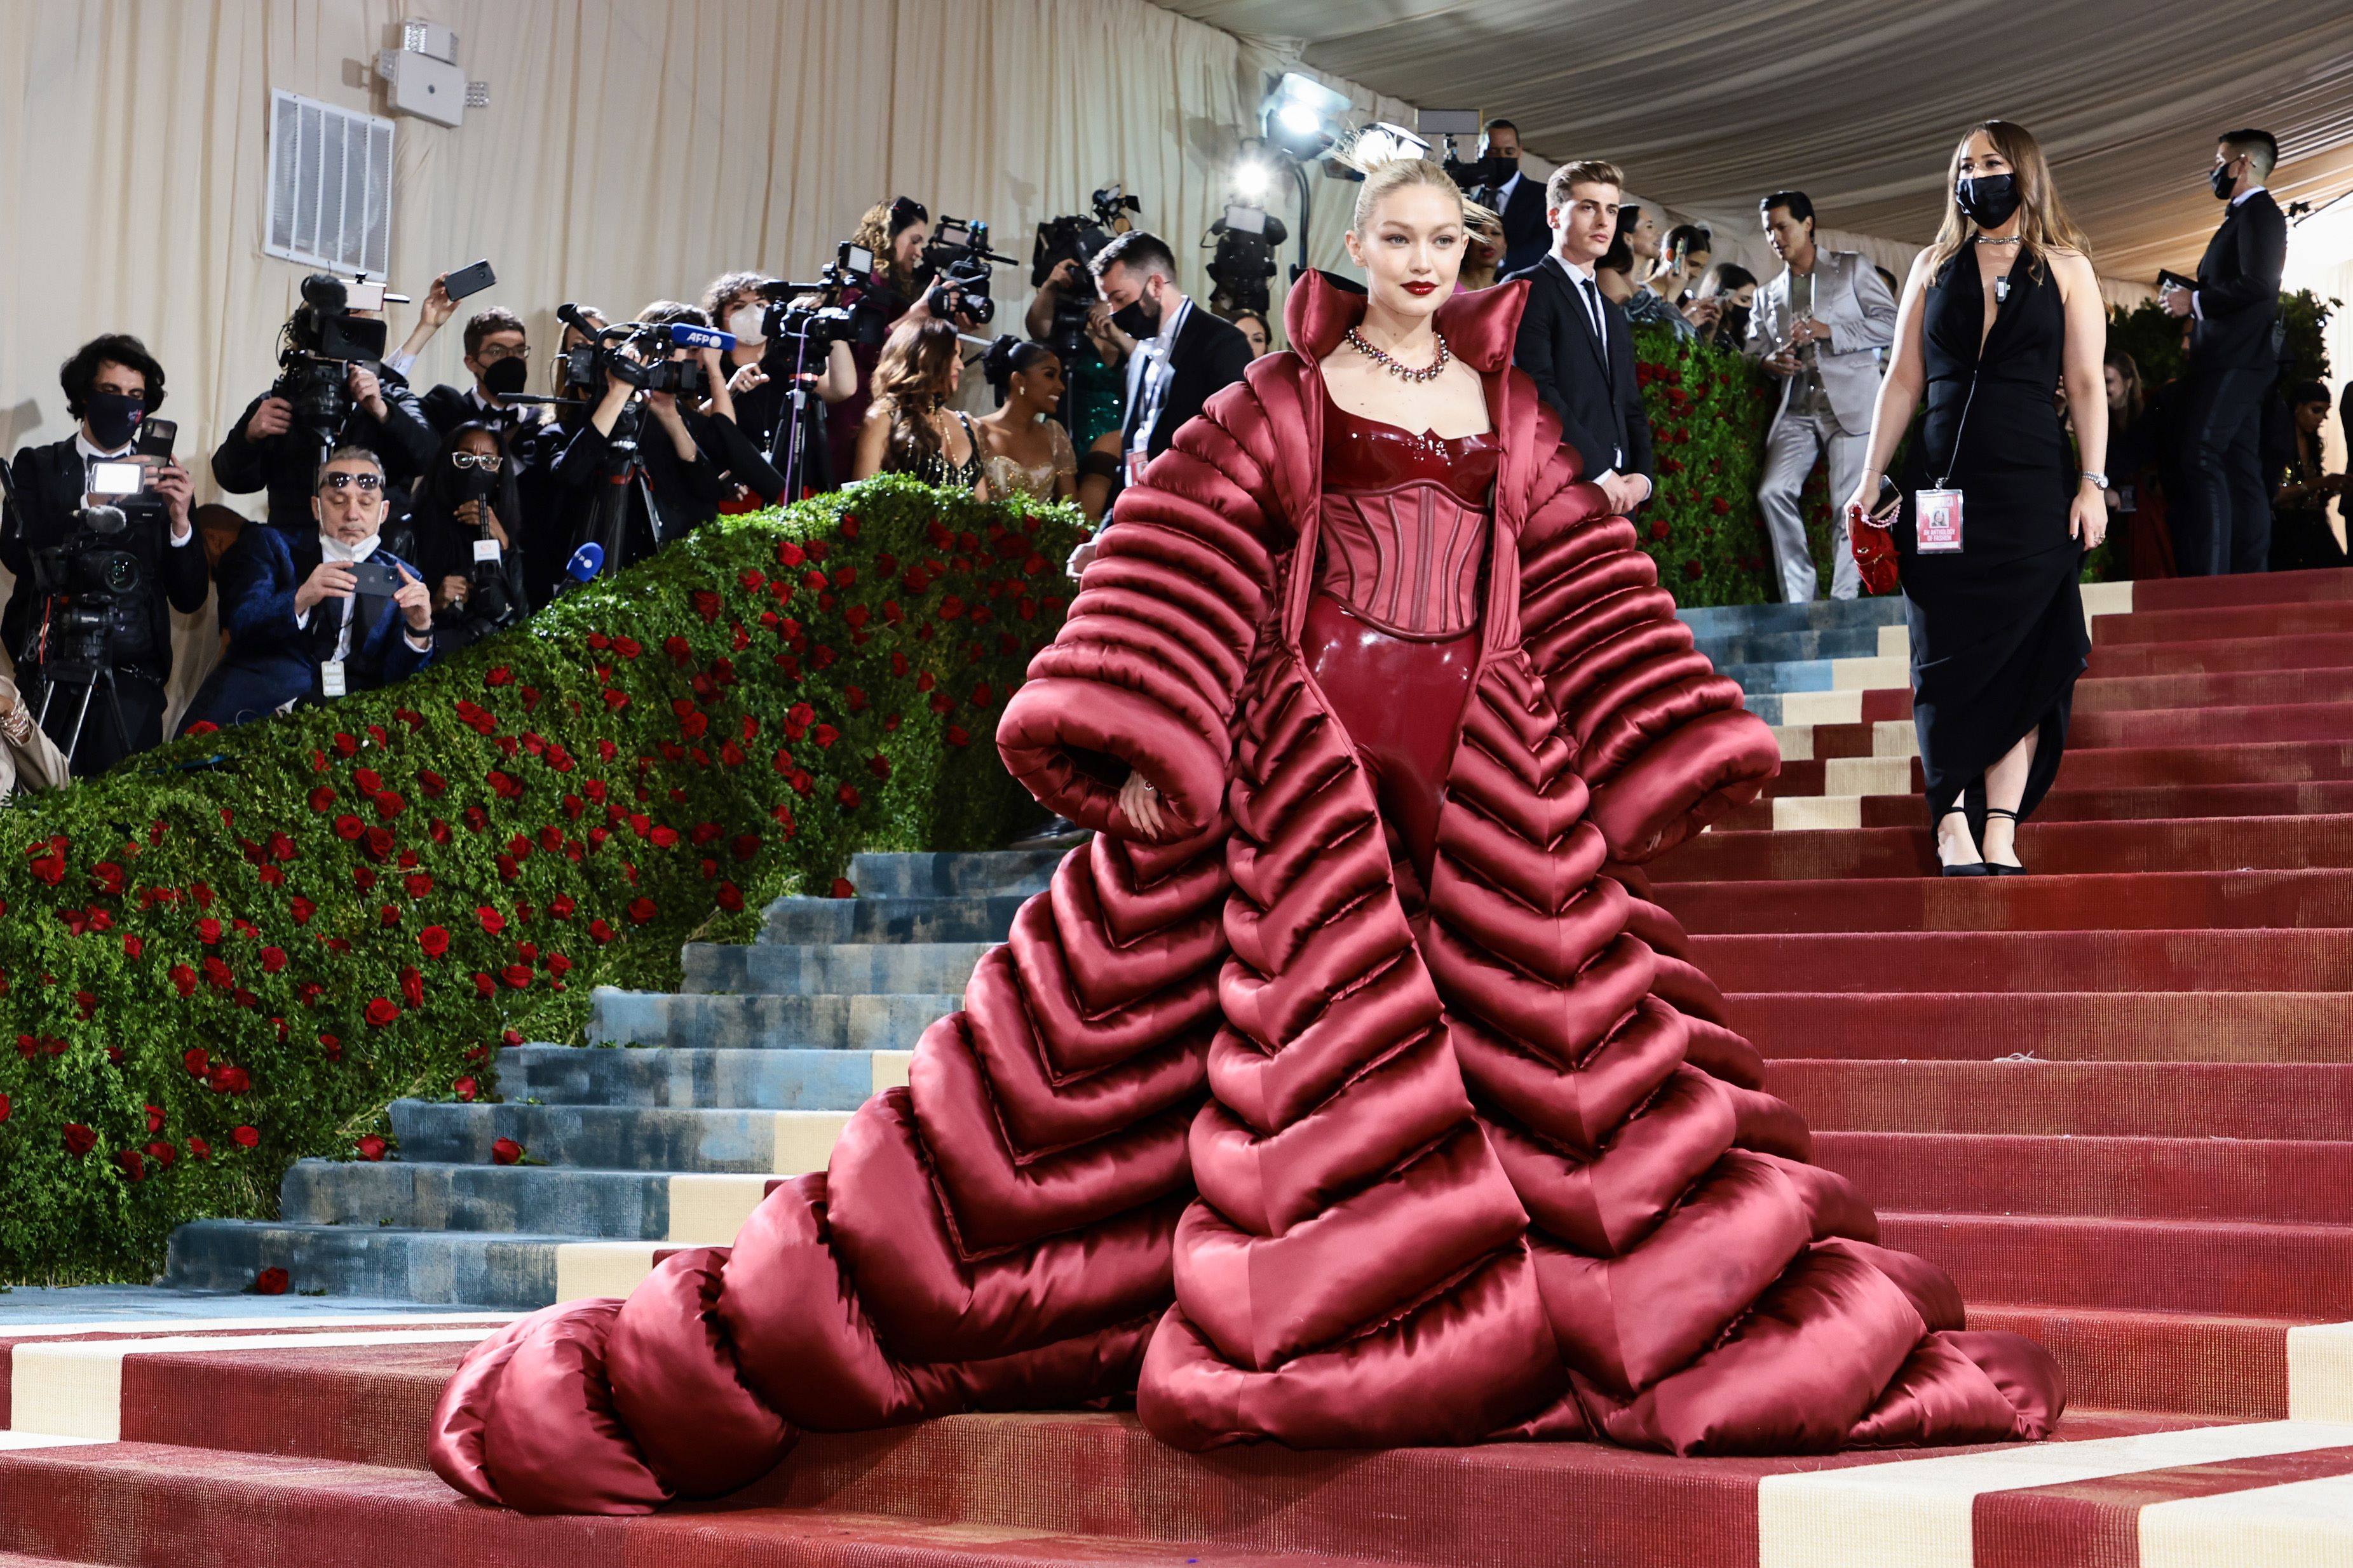 Gigi Hadid attends the Met Gala celebrating “In America: An Anthology of Fashion” at the Metropolitan Museum of Art in May 2022, in New York City. Photo: Getty Images